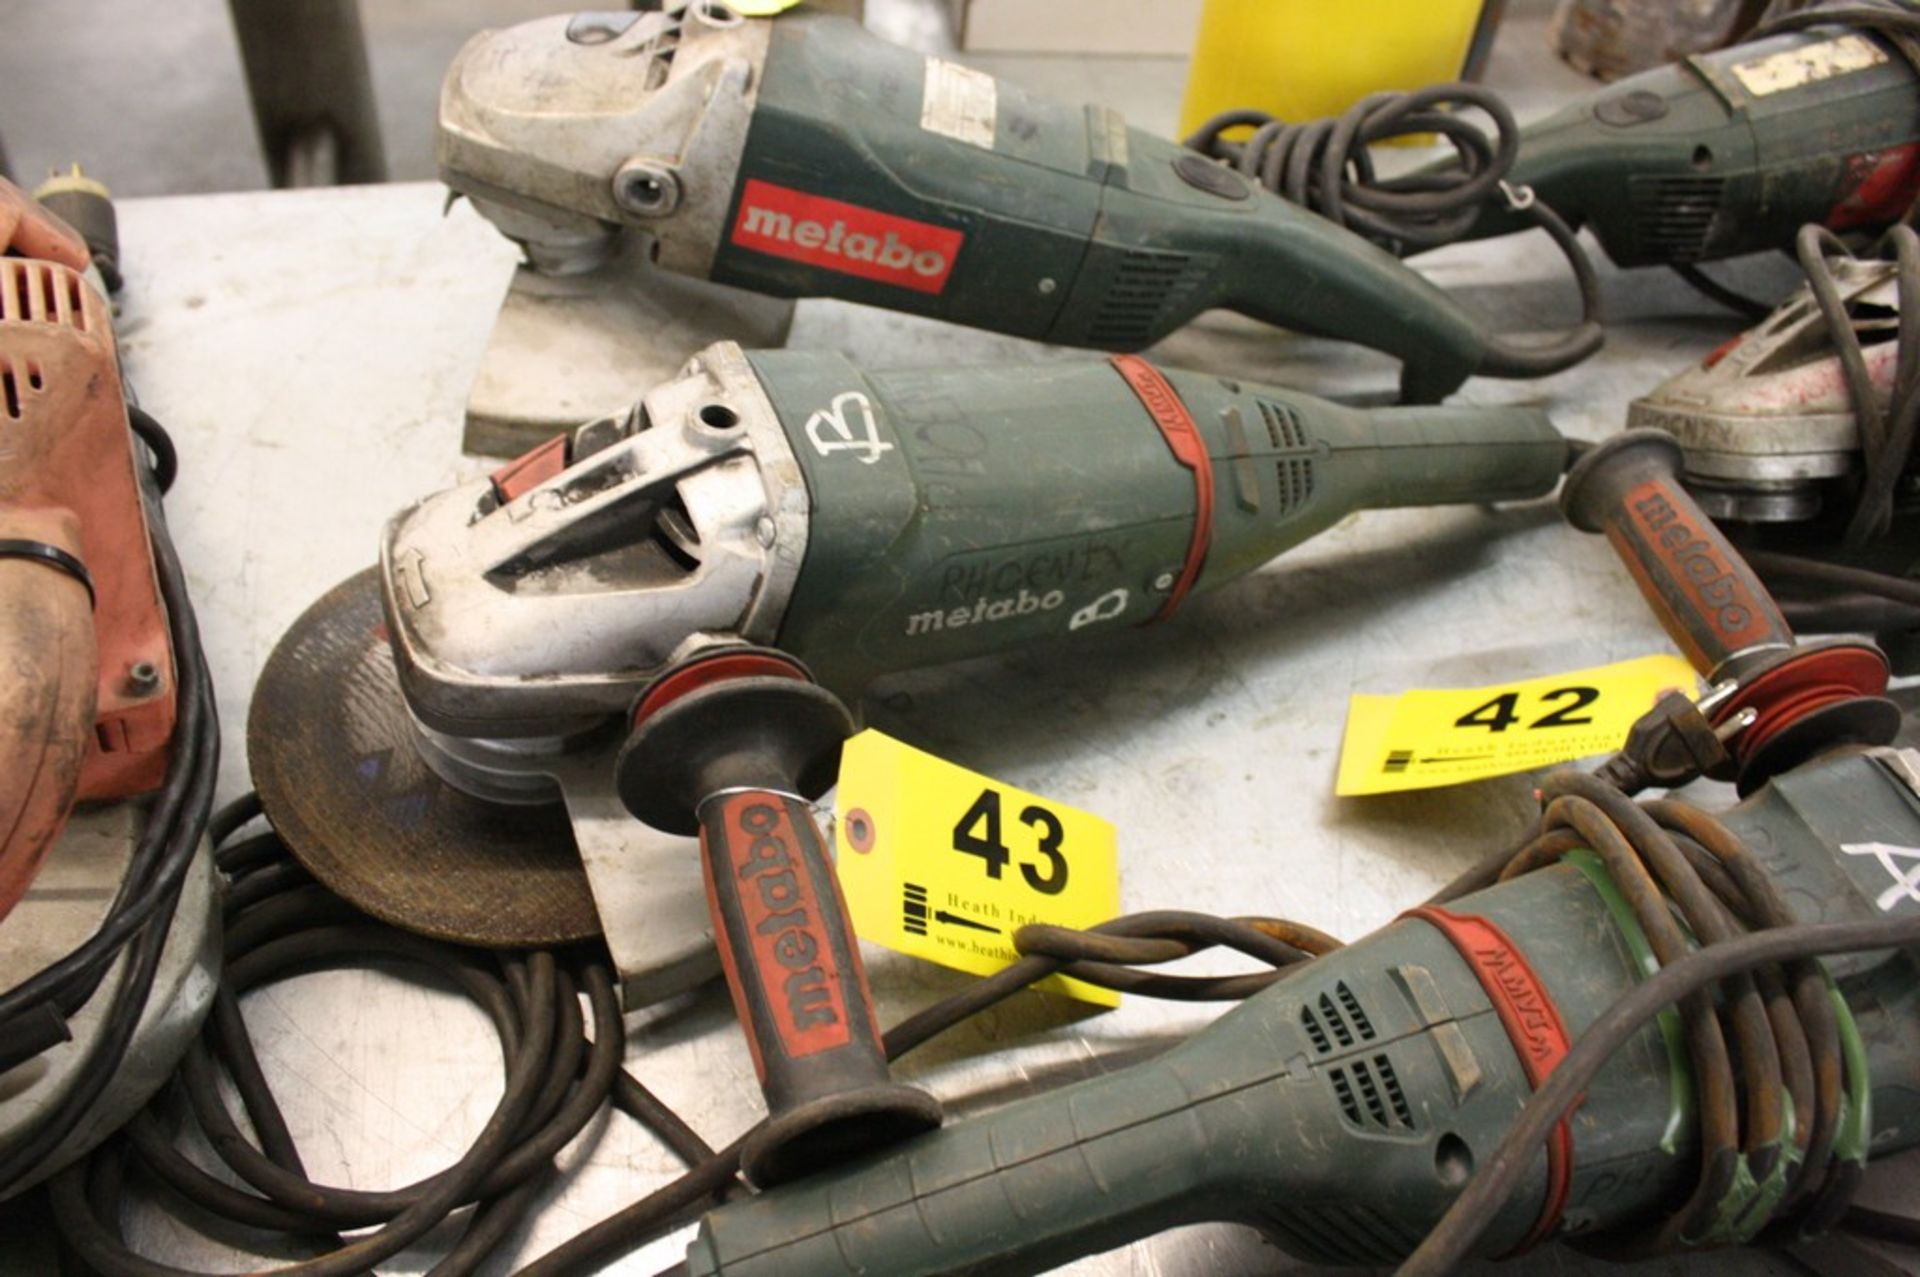 METABO MODEL W-24-230 9" RIGHT ANGLE GRINDER